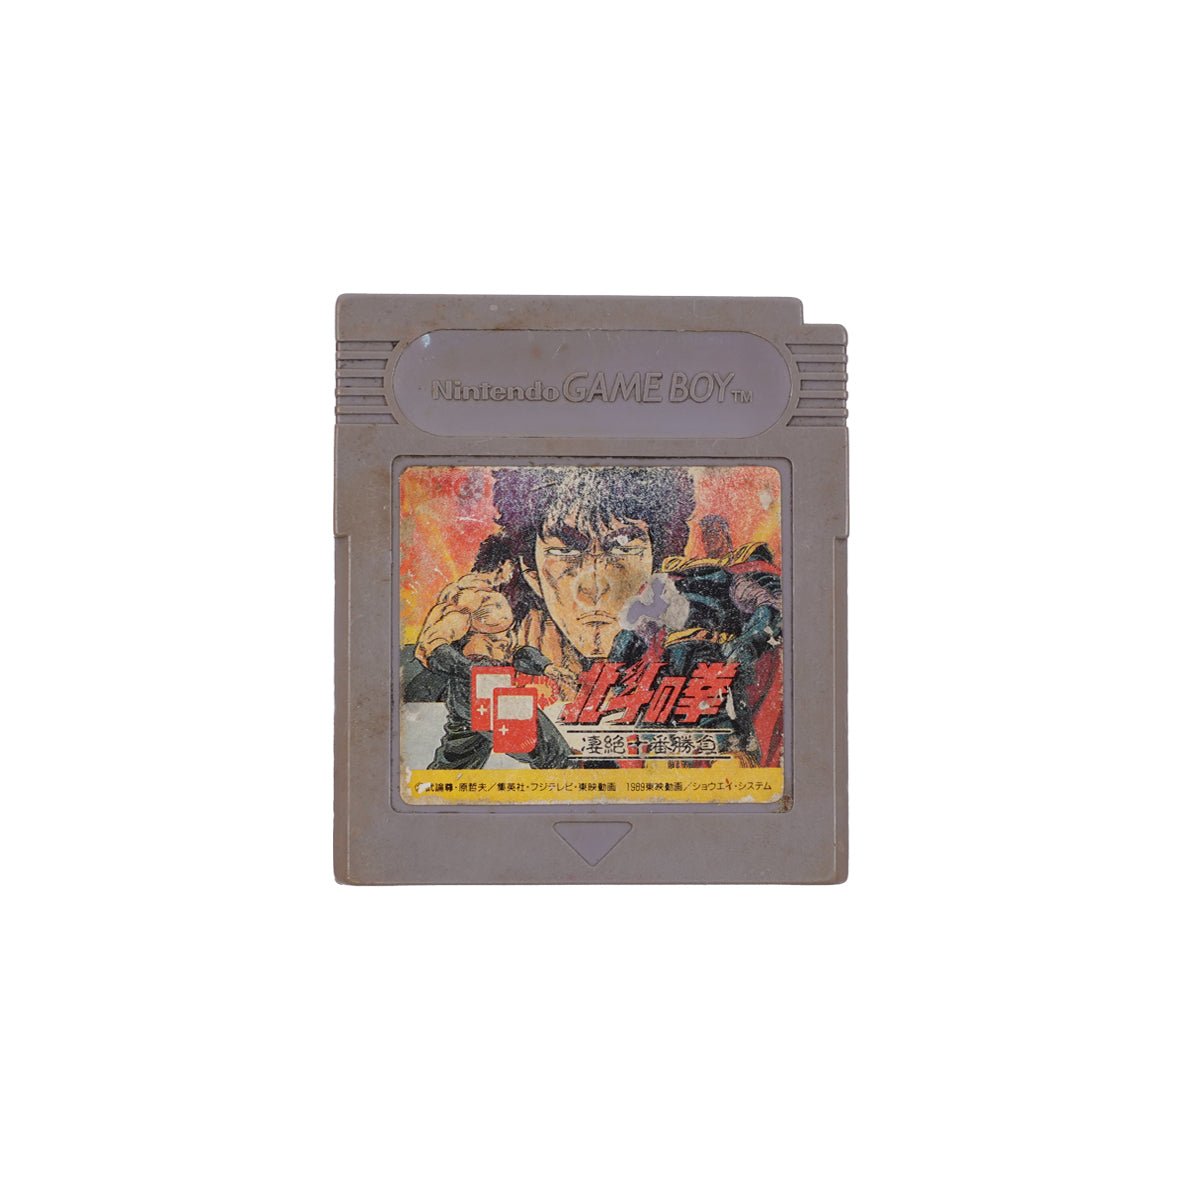 (Pre-Owned) Fist of North Star - Gameboy Color - Store 974 | ستور ٩٧٤